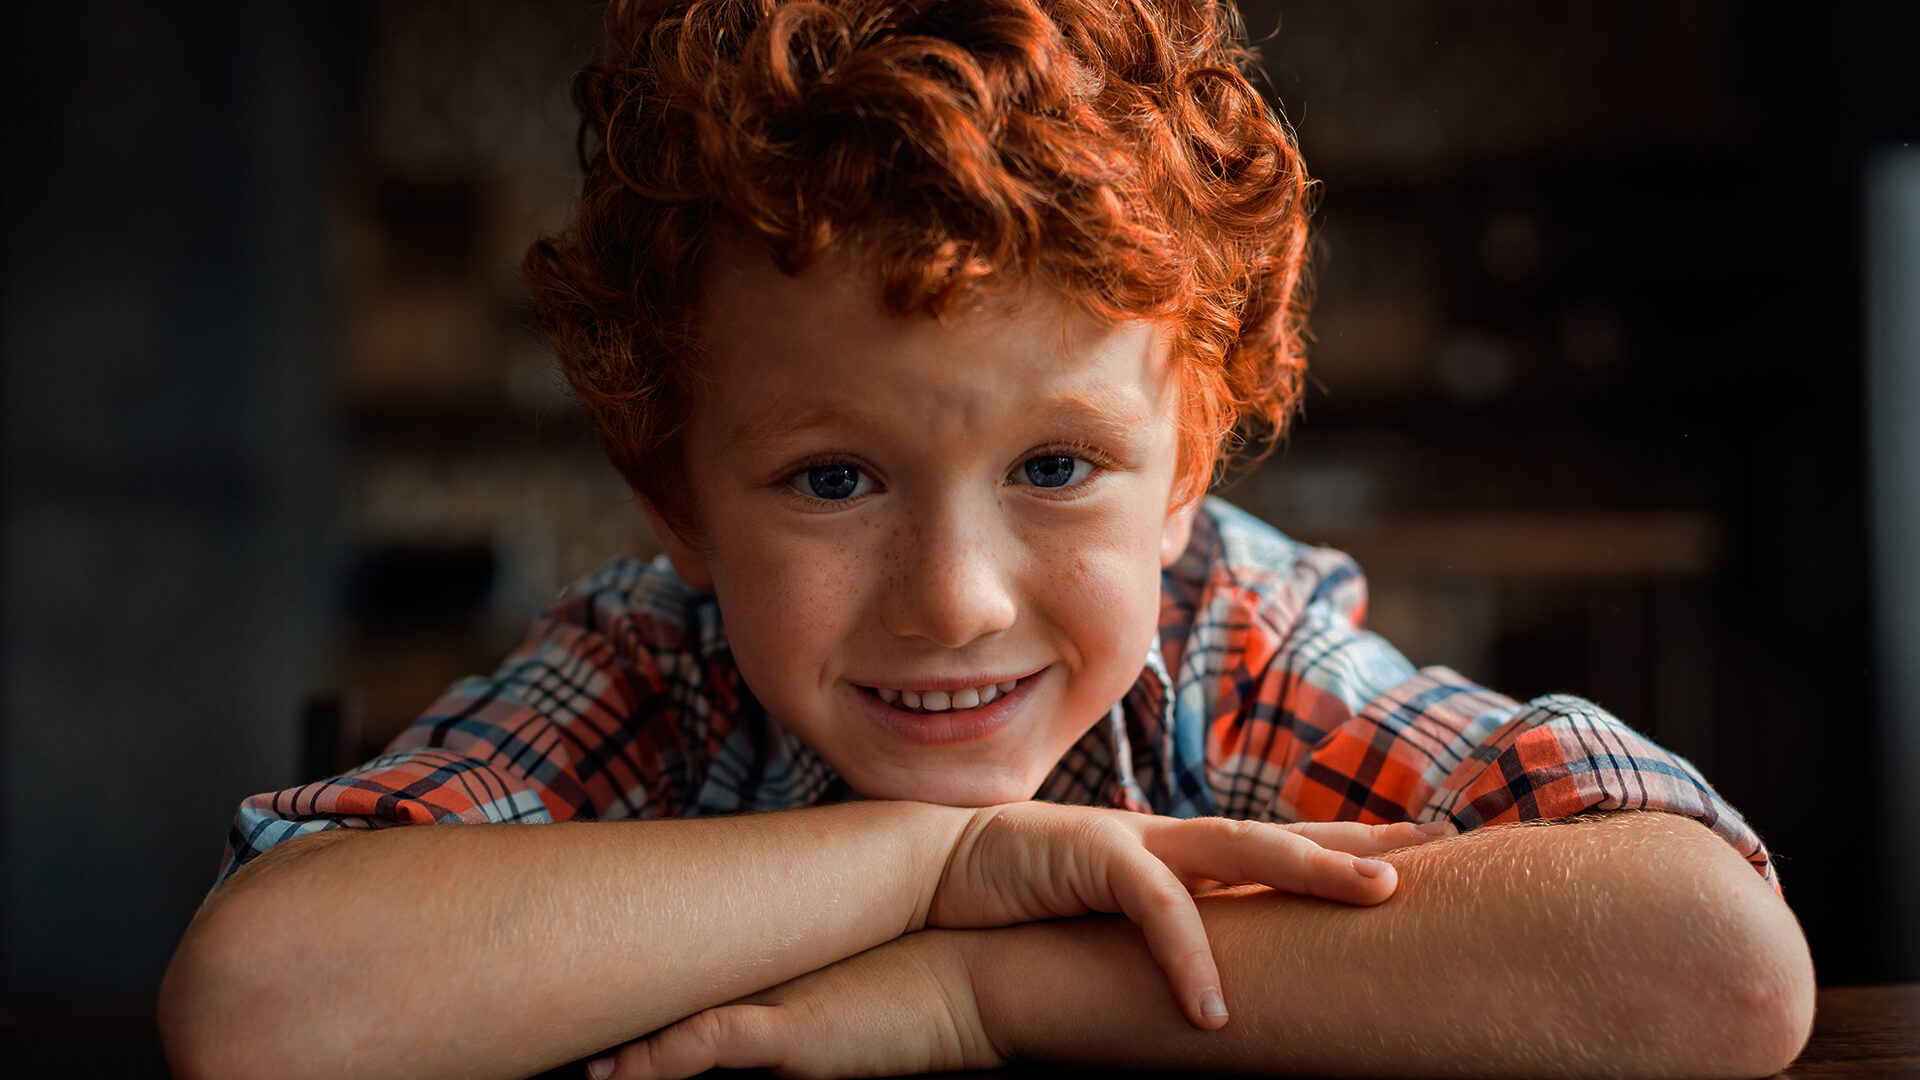 Boy with red hair smiling